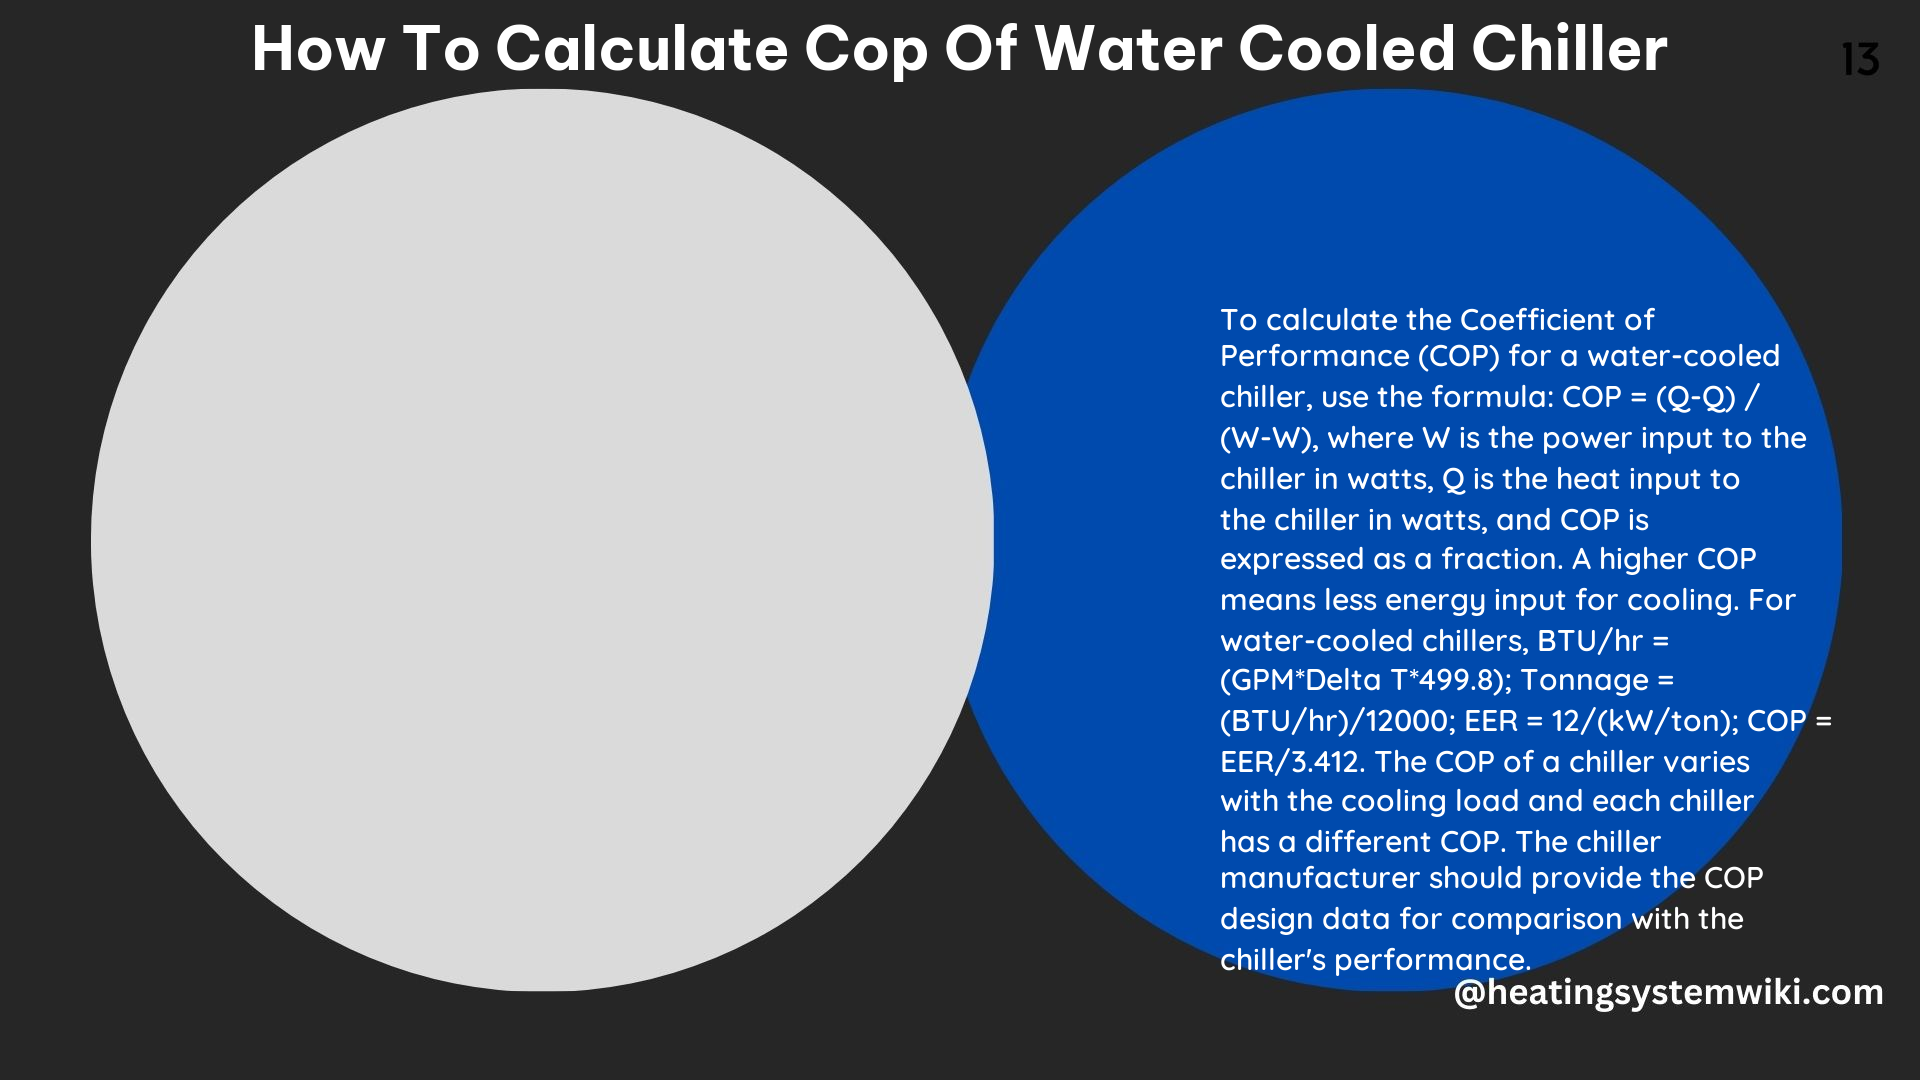 How to Calculate Cop of Water Cooled Chiller